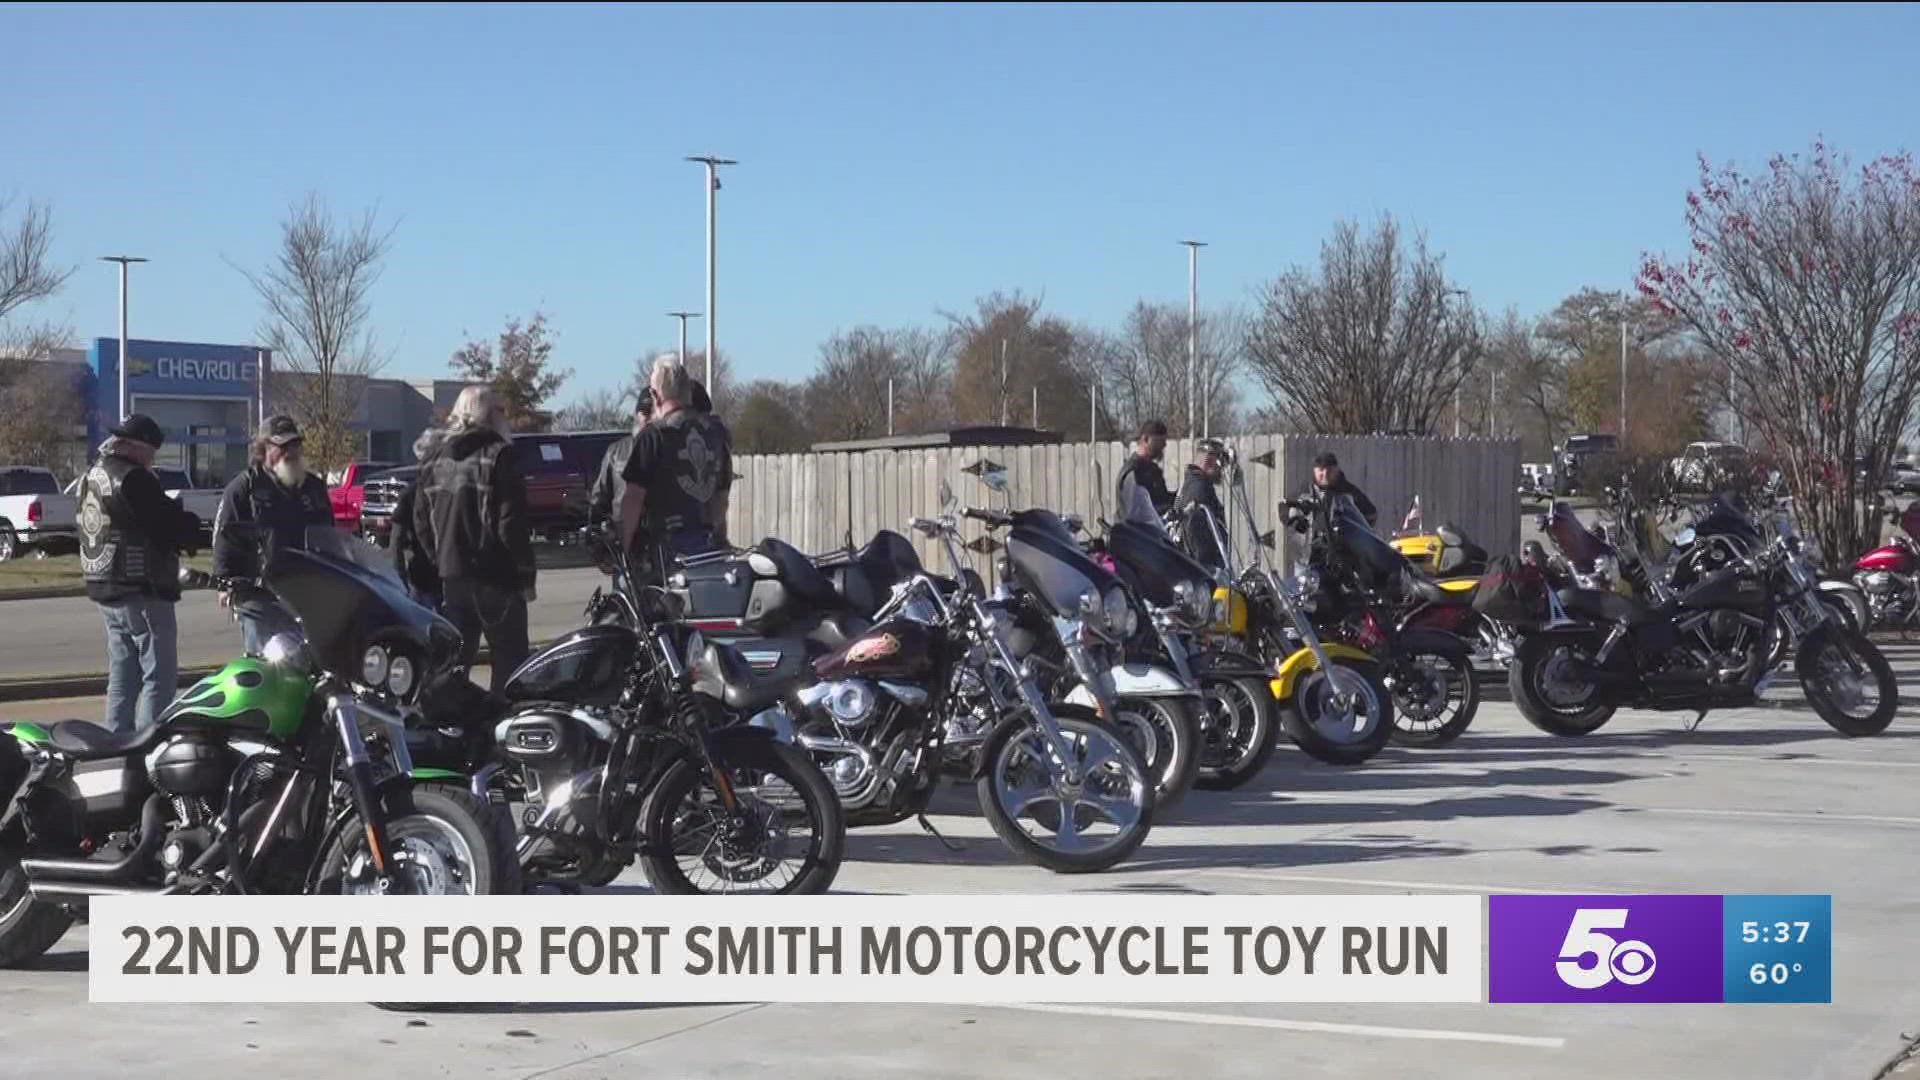 The 22nd year for the Fort Smith Motorcycle toy run took place Sunday, Nov. 28.